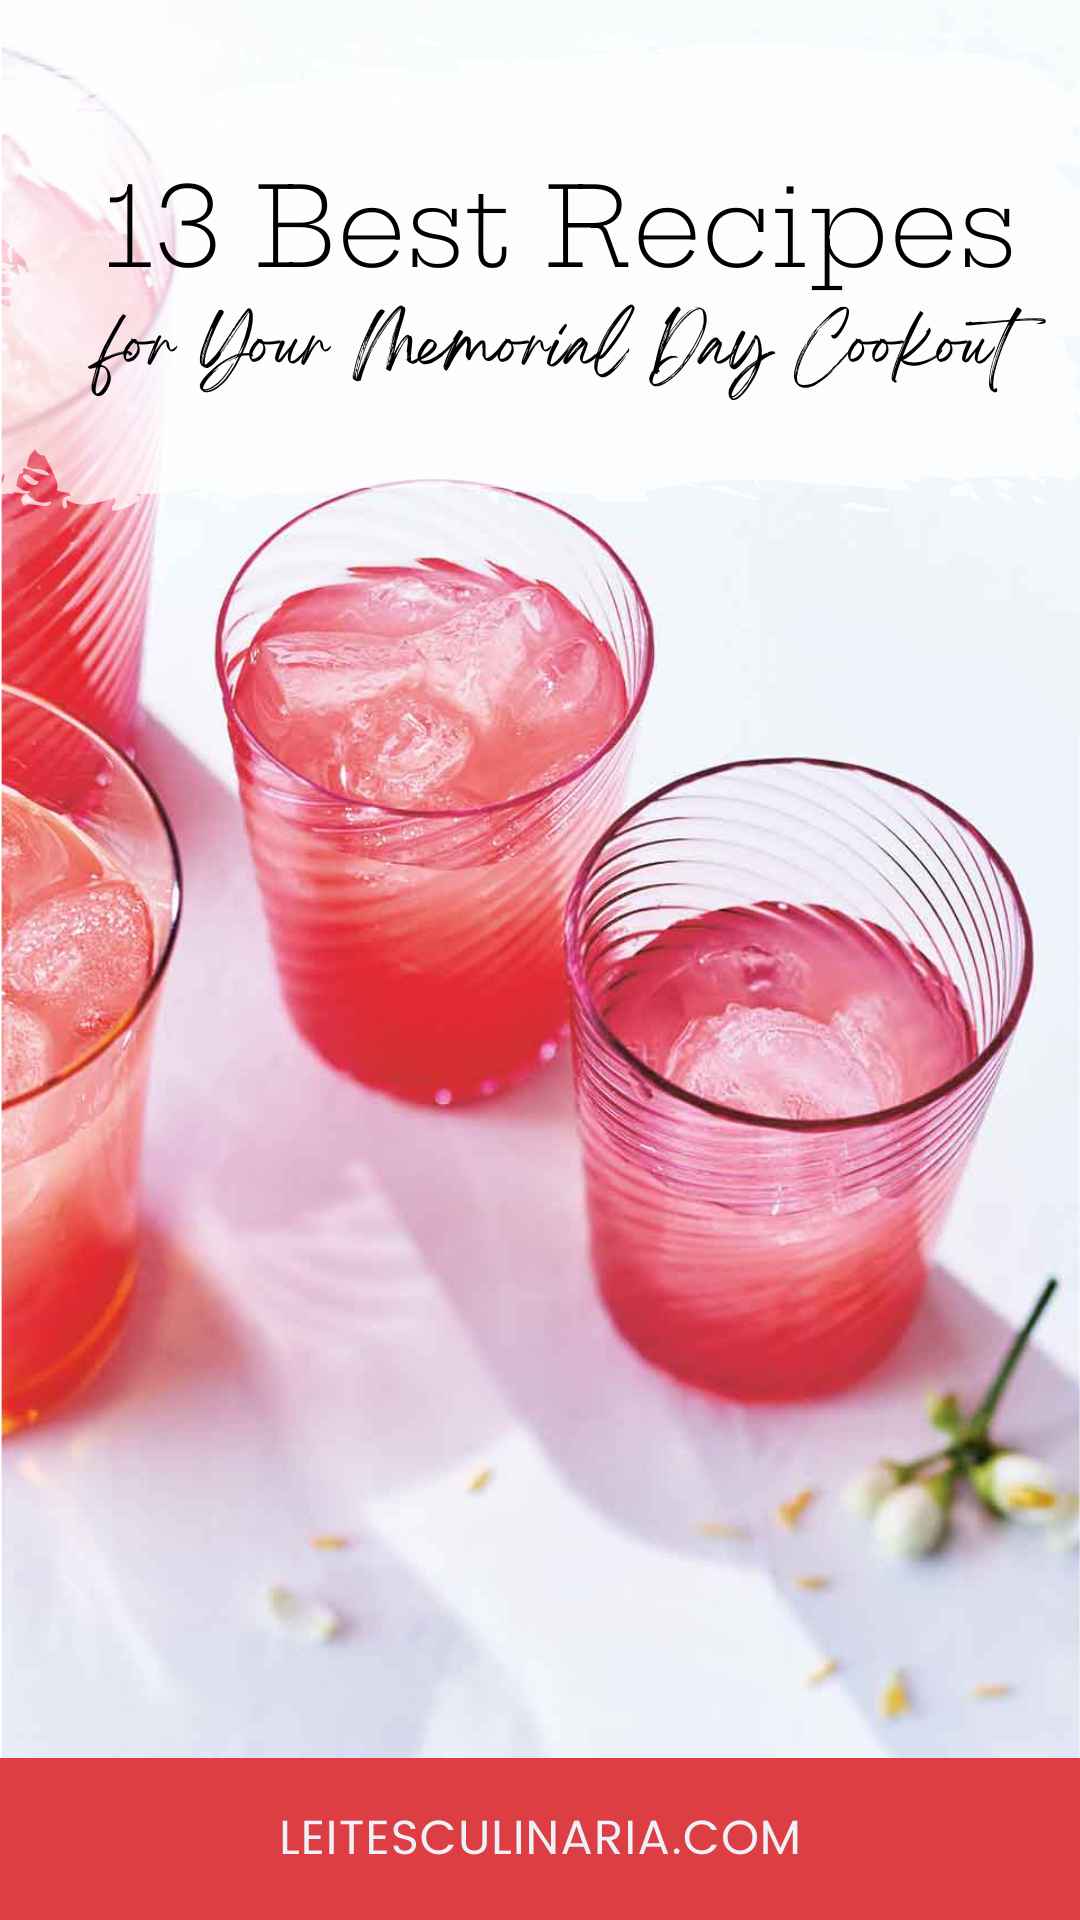 Four glasses of watermelon lemonade with ice cubes.